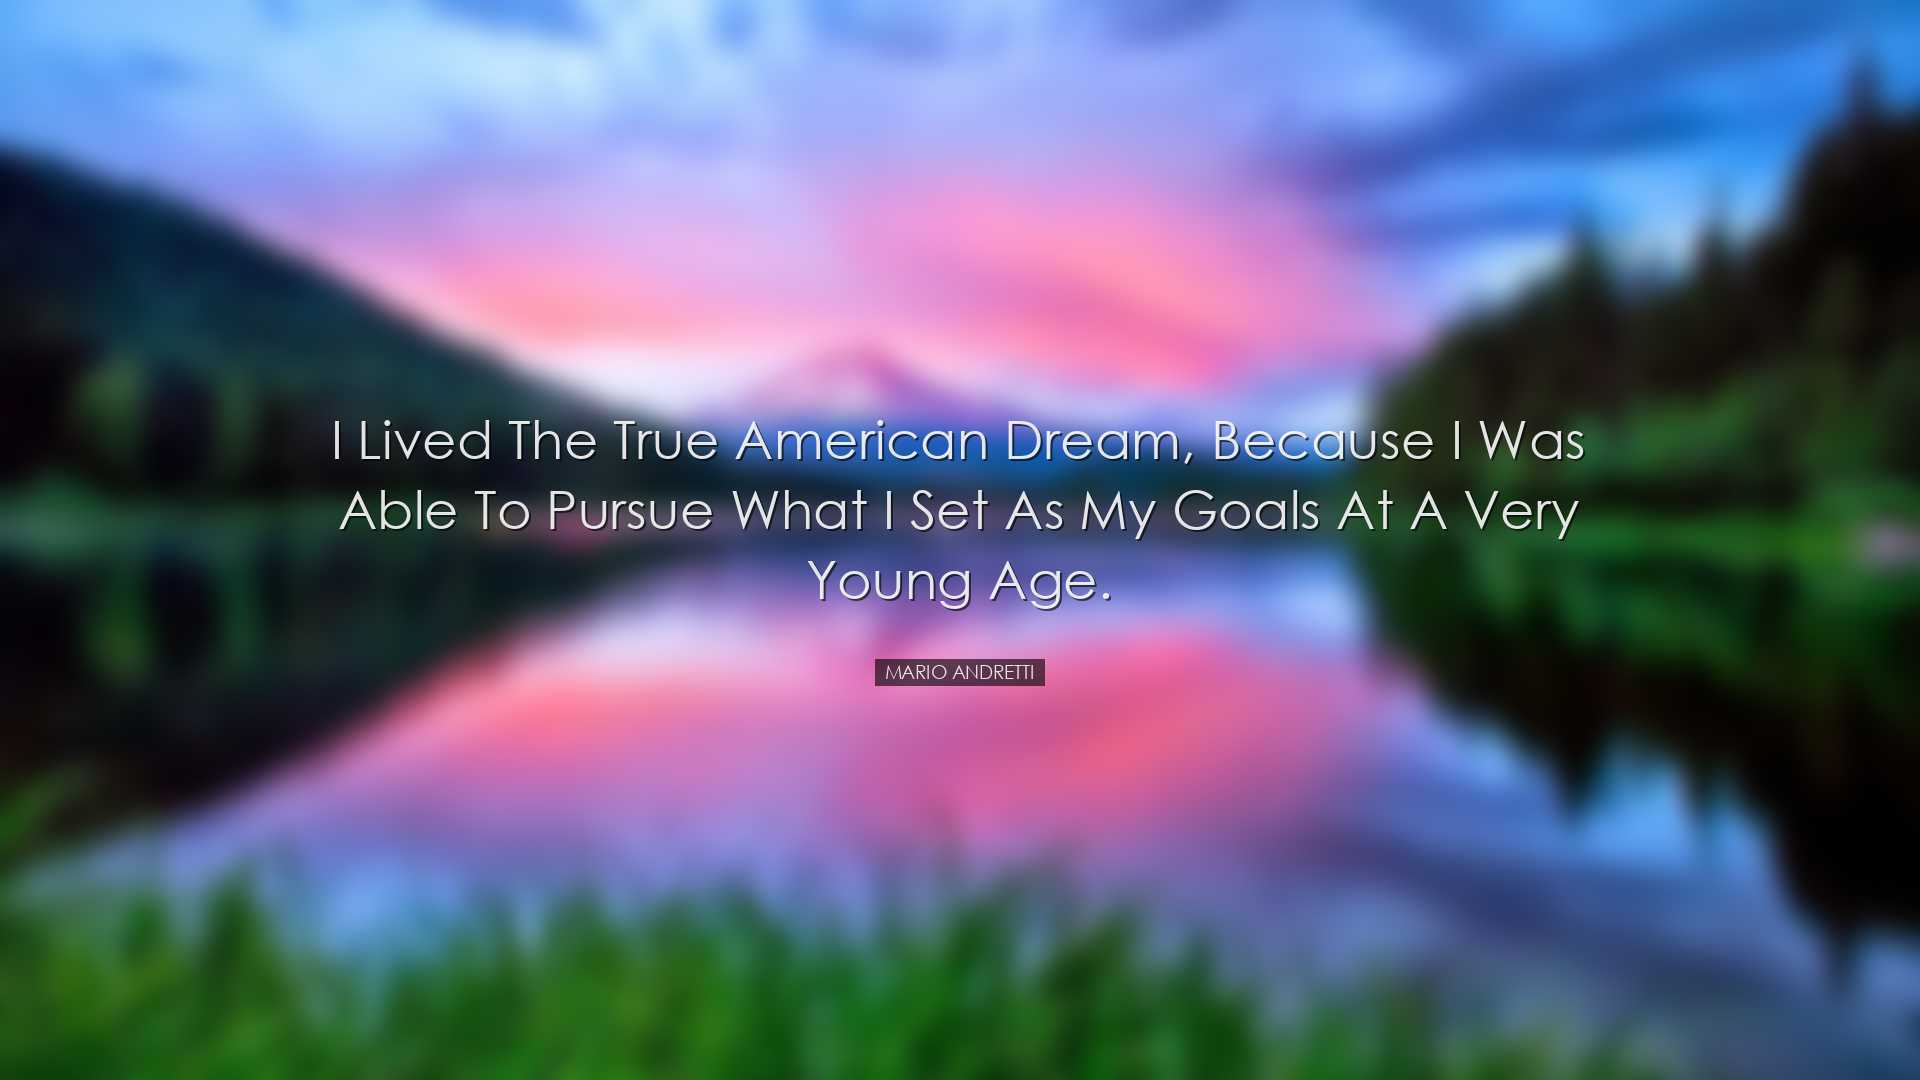 I lived the true American dream, because I was able to pursue what